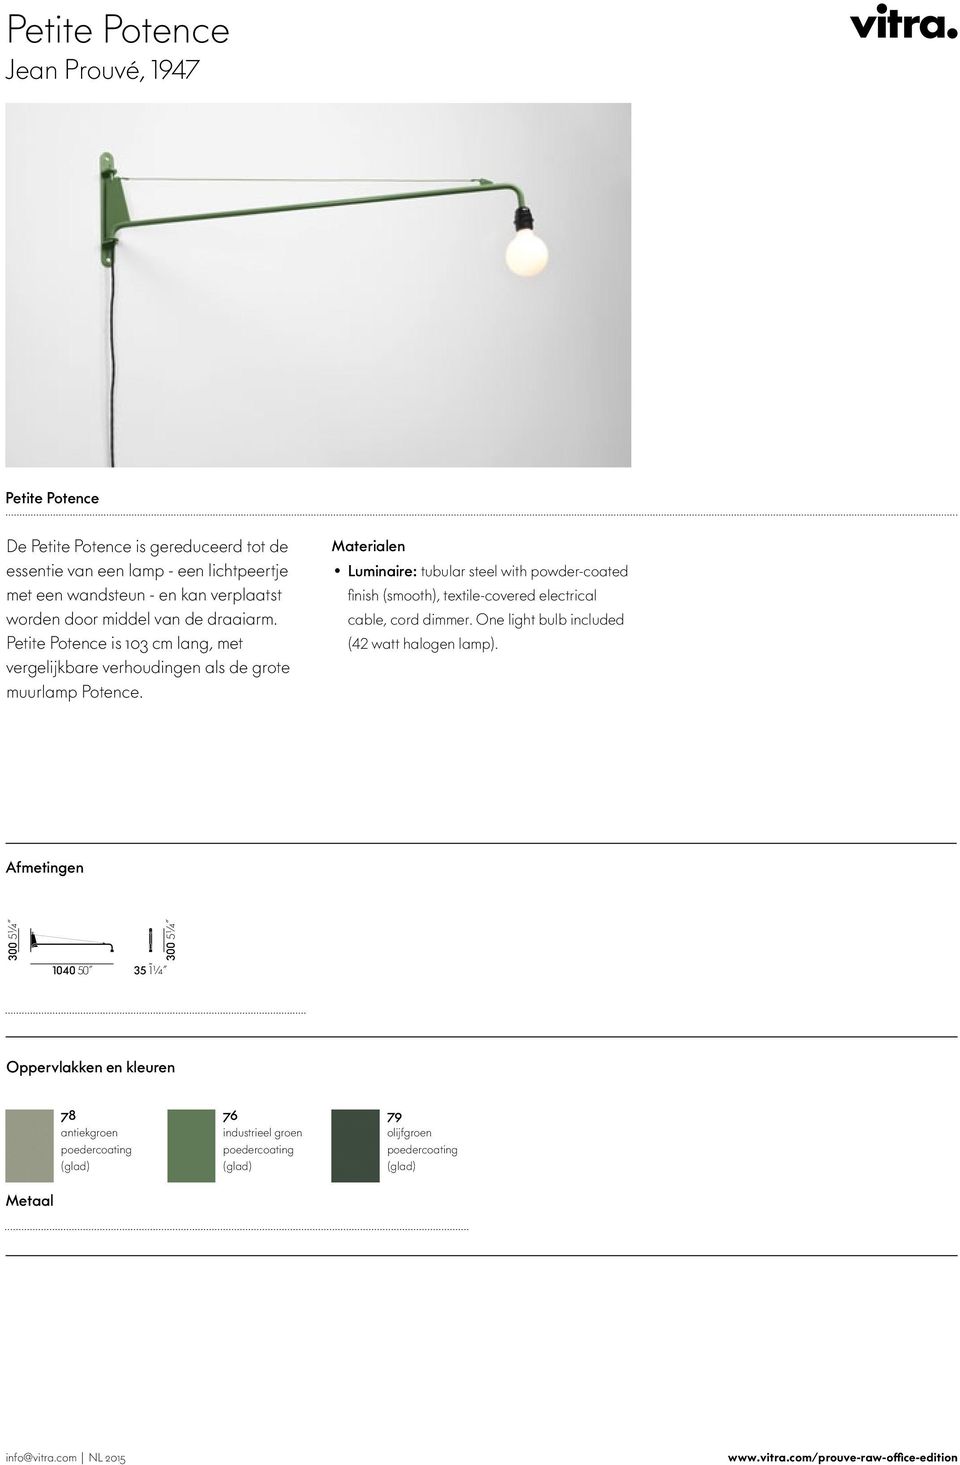 Luminaire: tubular steel with powder-coated finish (smooth), textile-coered electrical cable, cord dimmer.